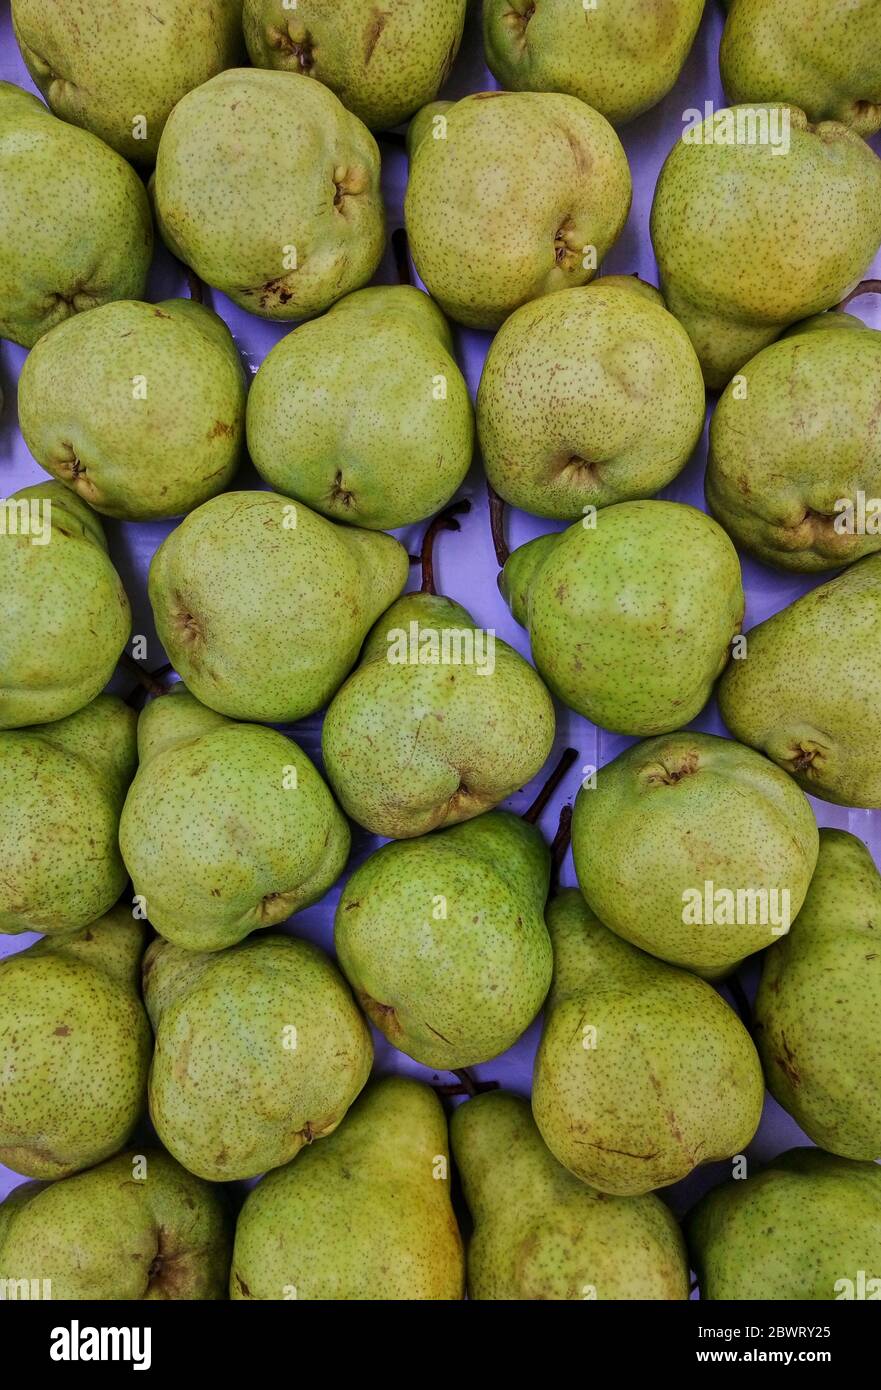 Fresh green pears in a supermarket storefront in Purwakarta, West Java, Indonesia. Photo concept for a healthy, natural lifestyle Stock Photo